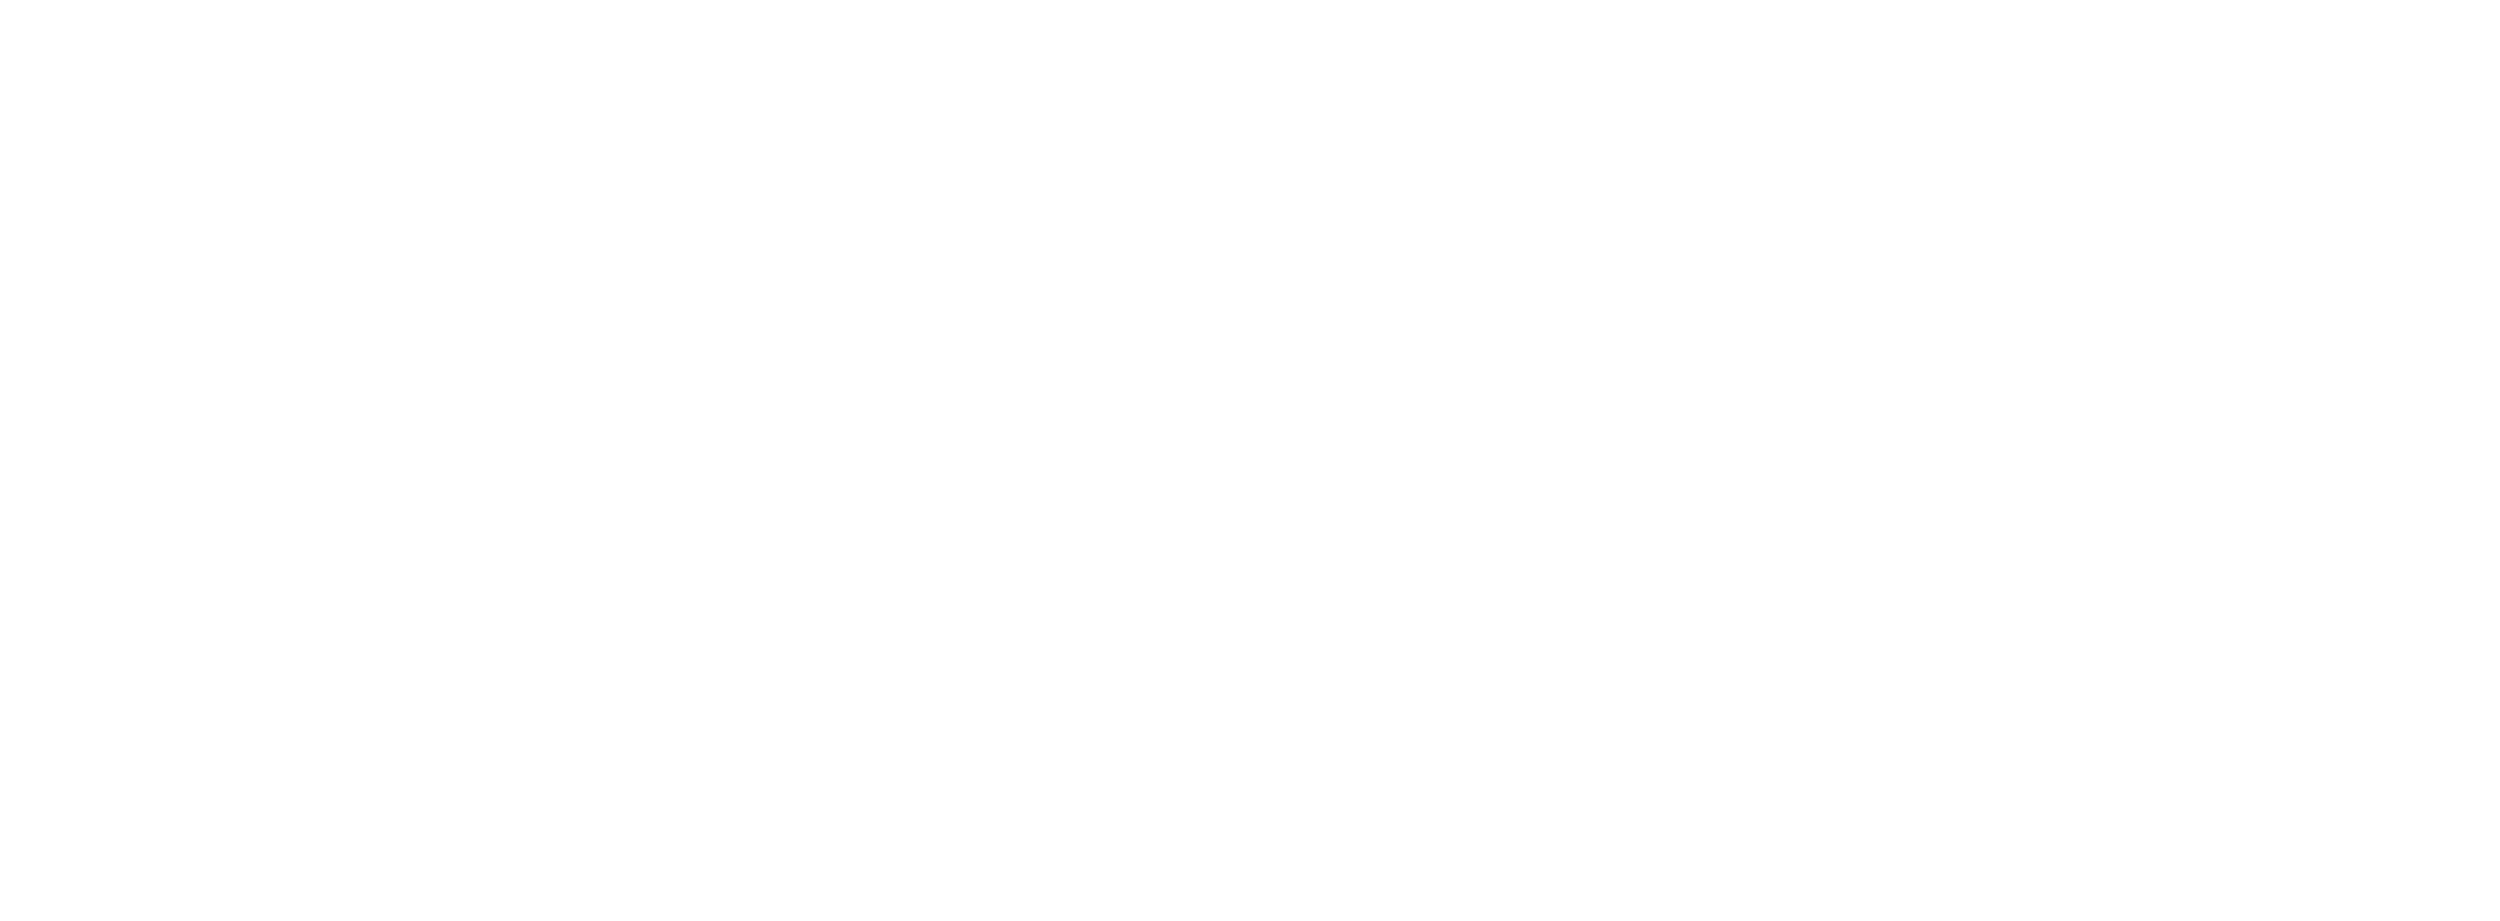 Andy Rees Music